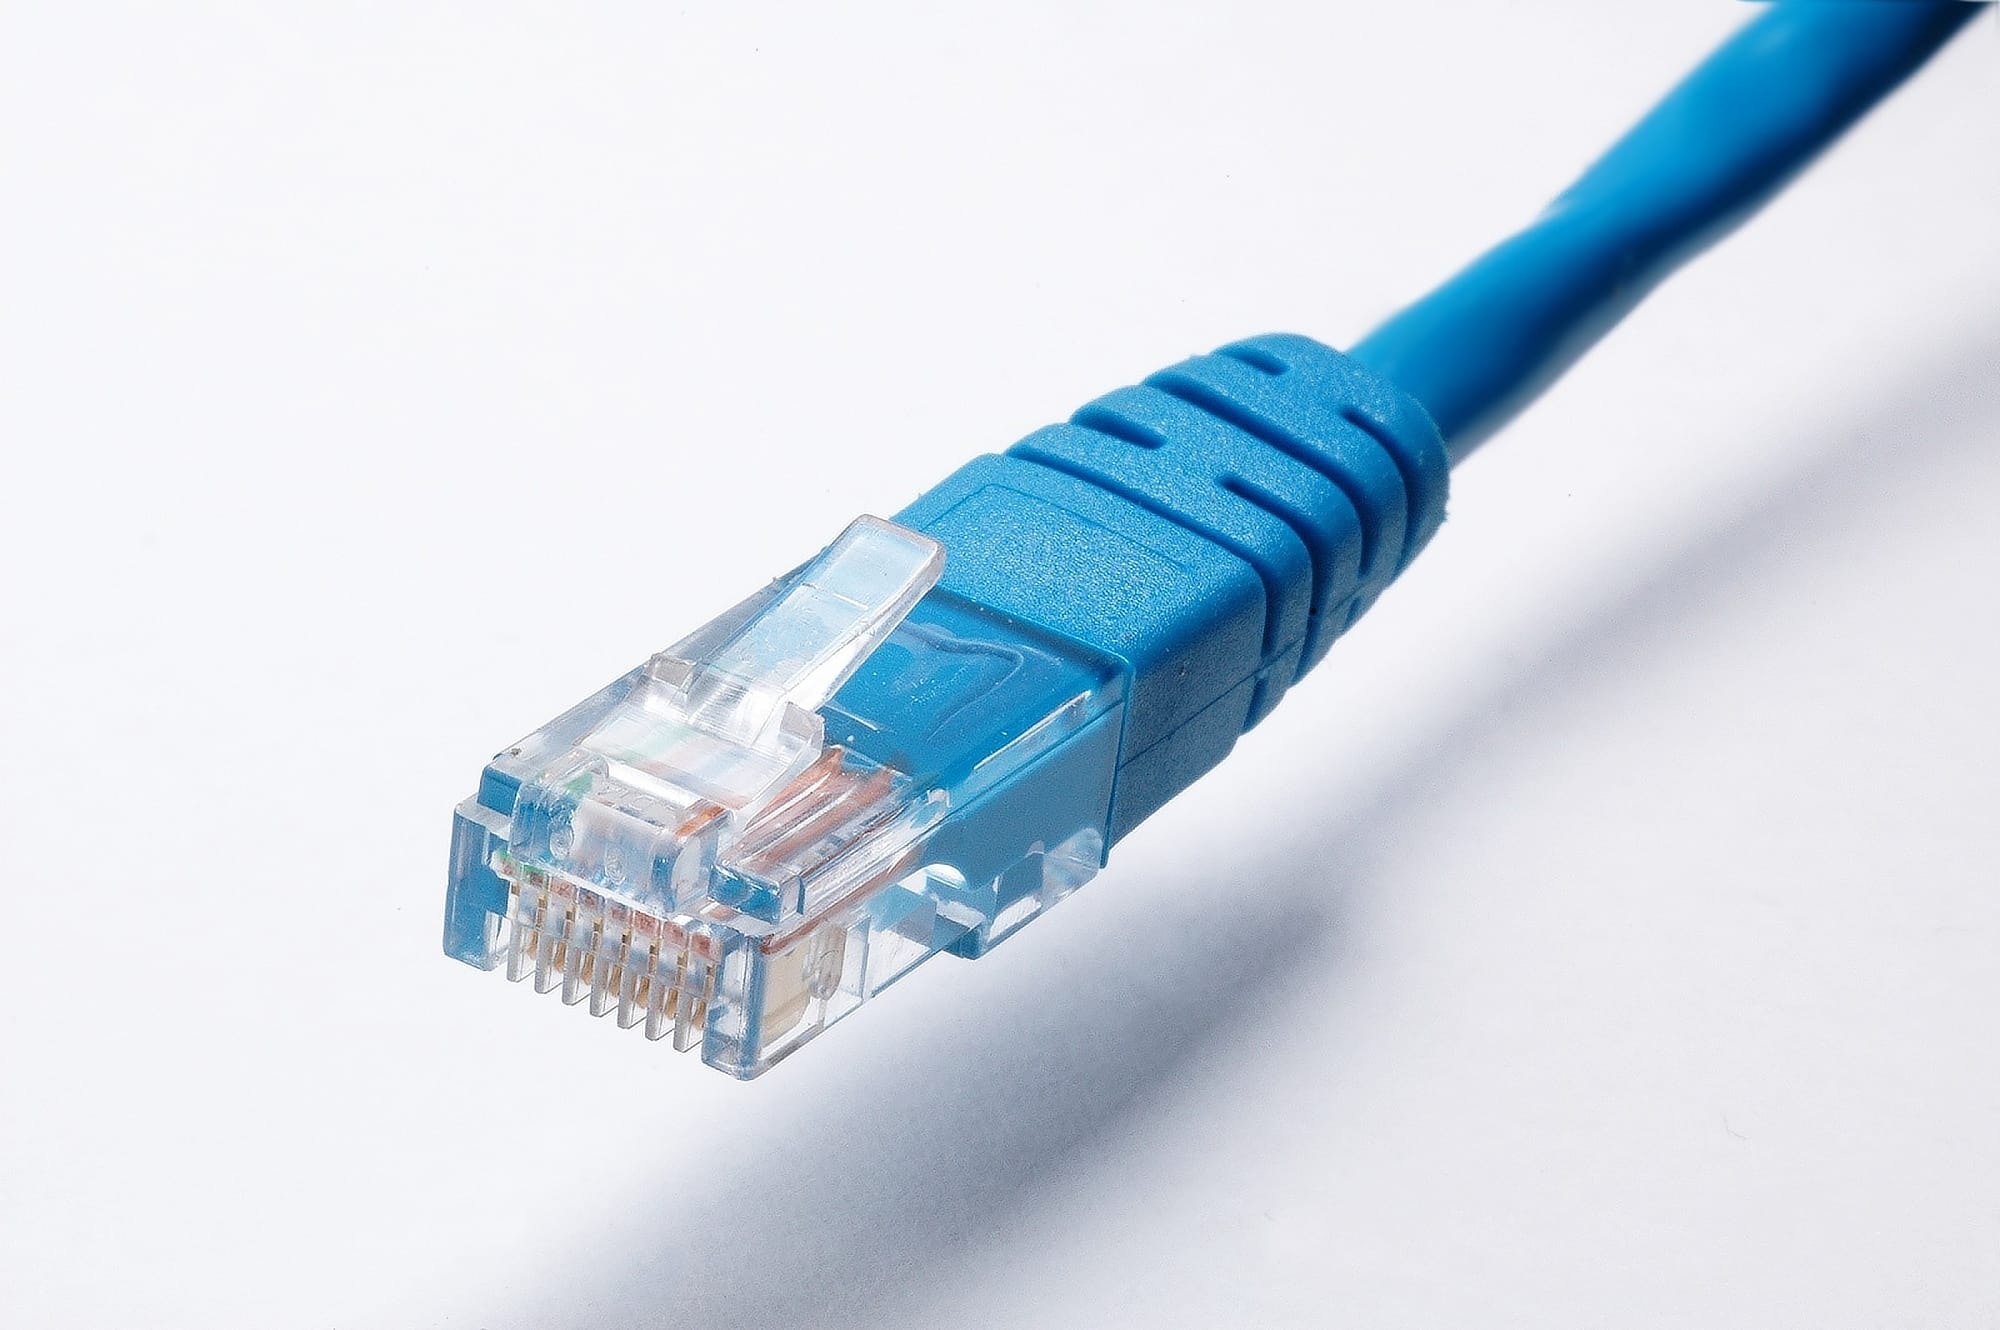 Photo shows a blue ethernet cable. Power of ethernet can be a flexible option for low-voltage applications.